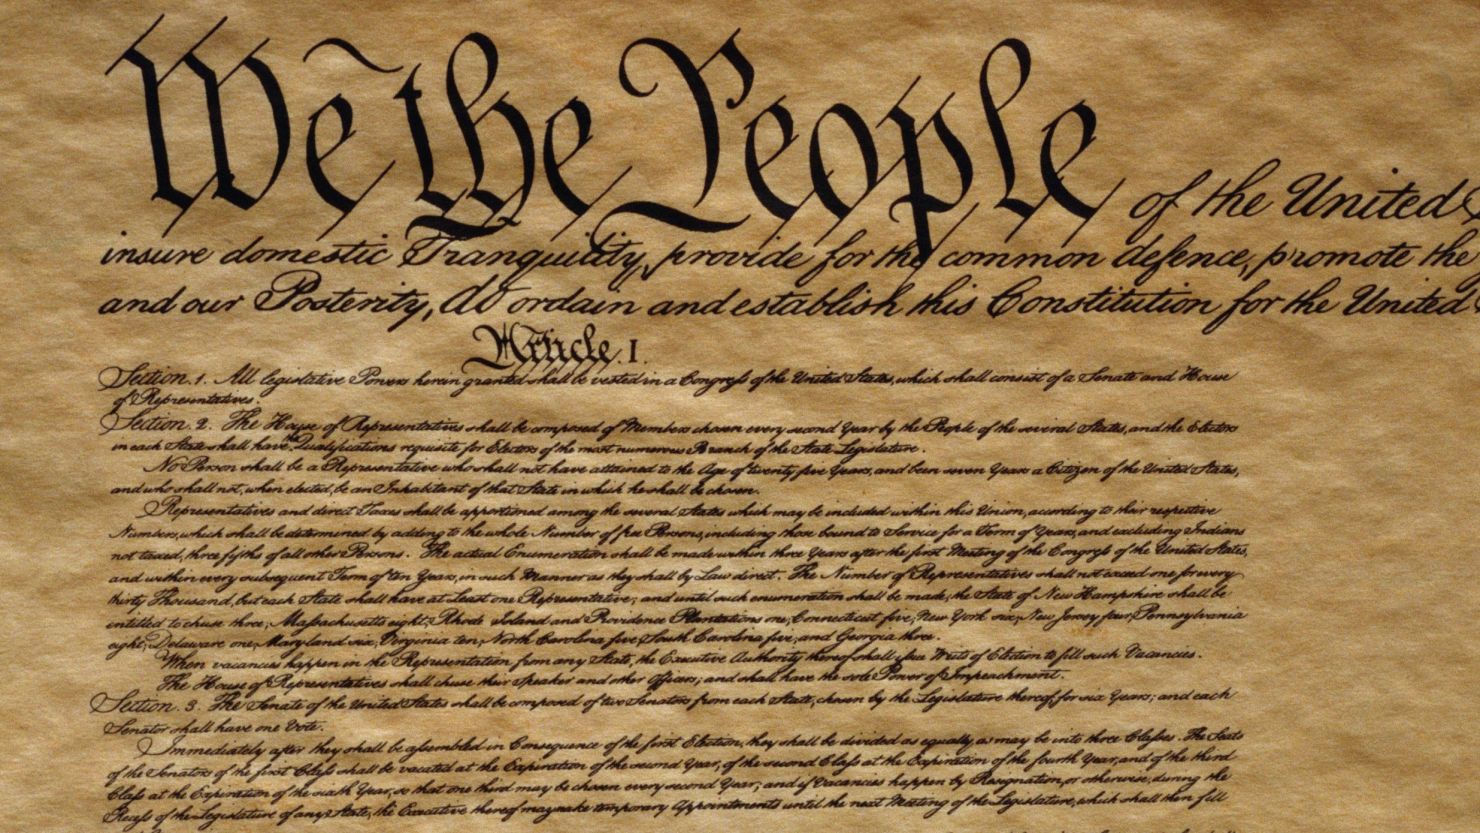 The Constitution of the United States of America 